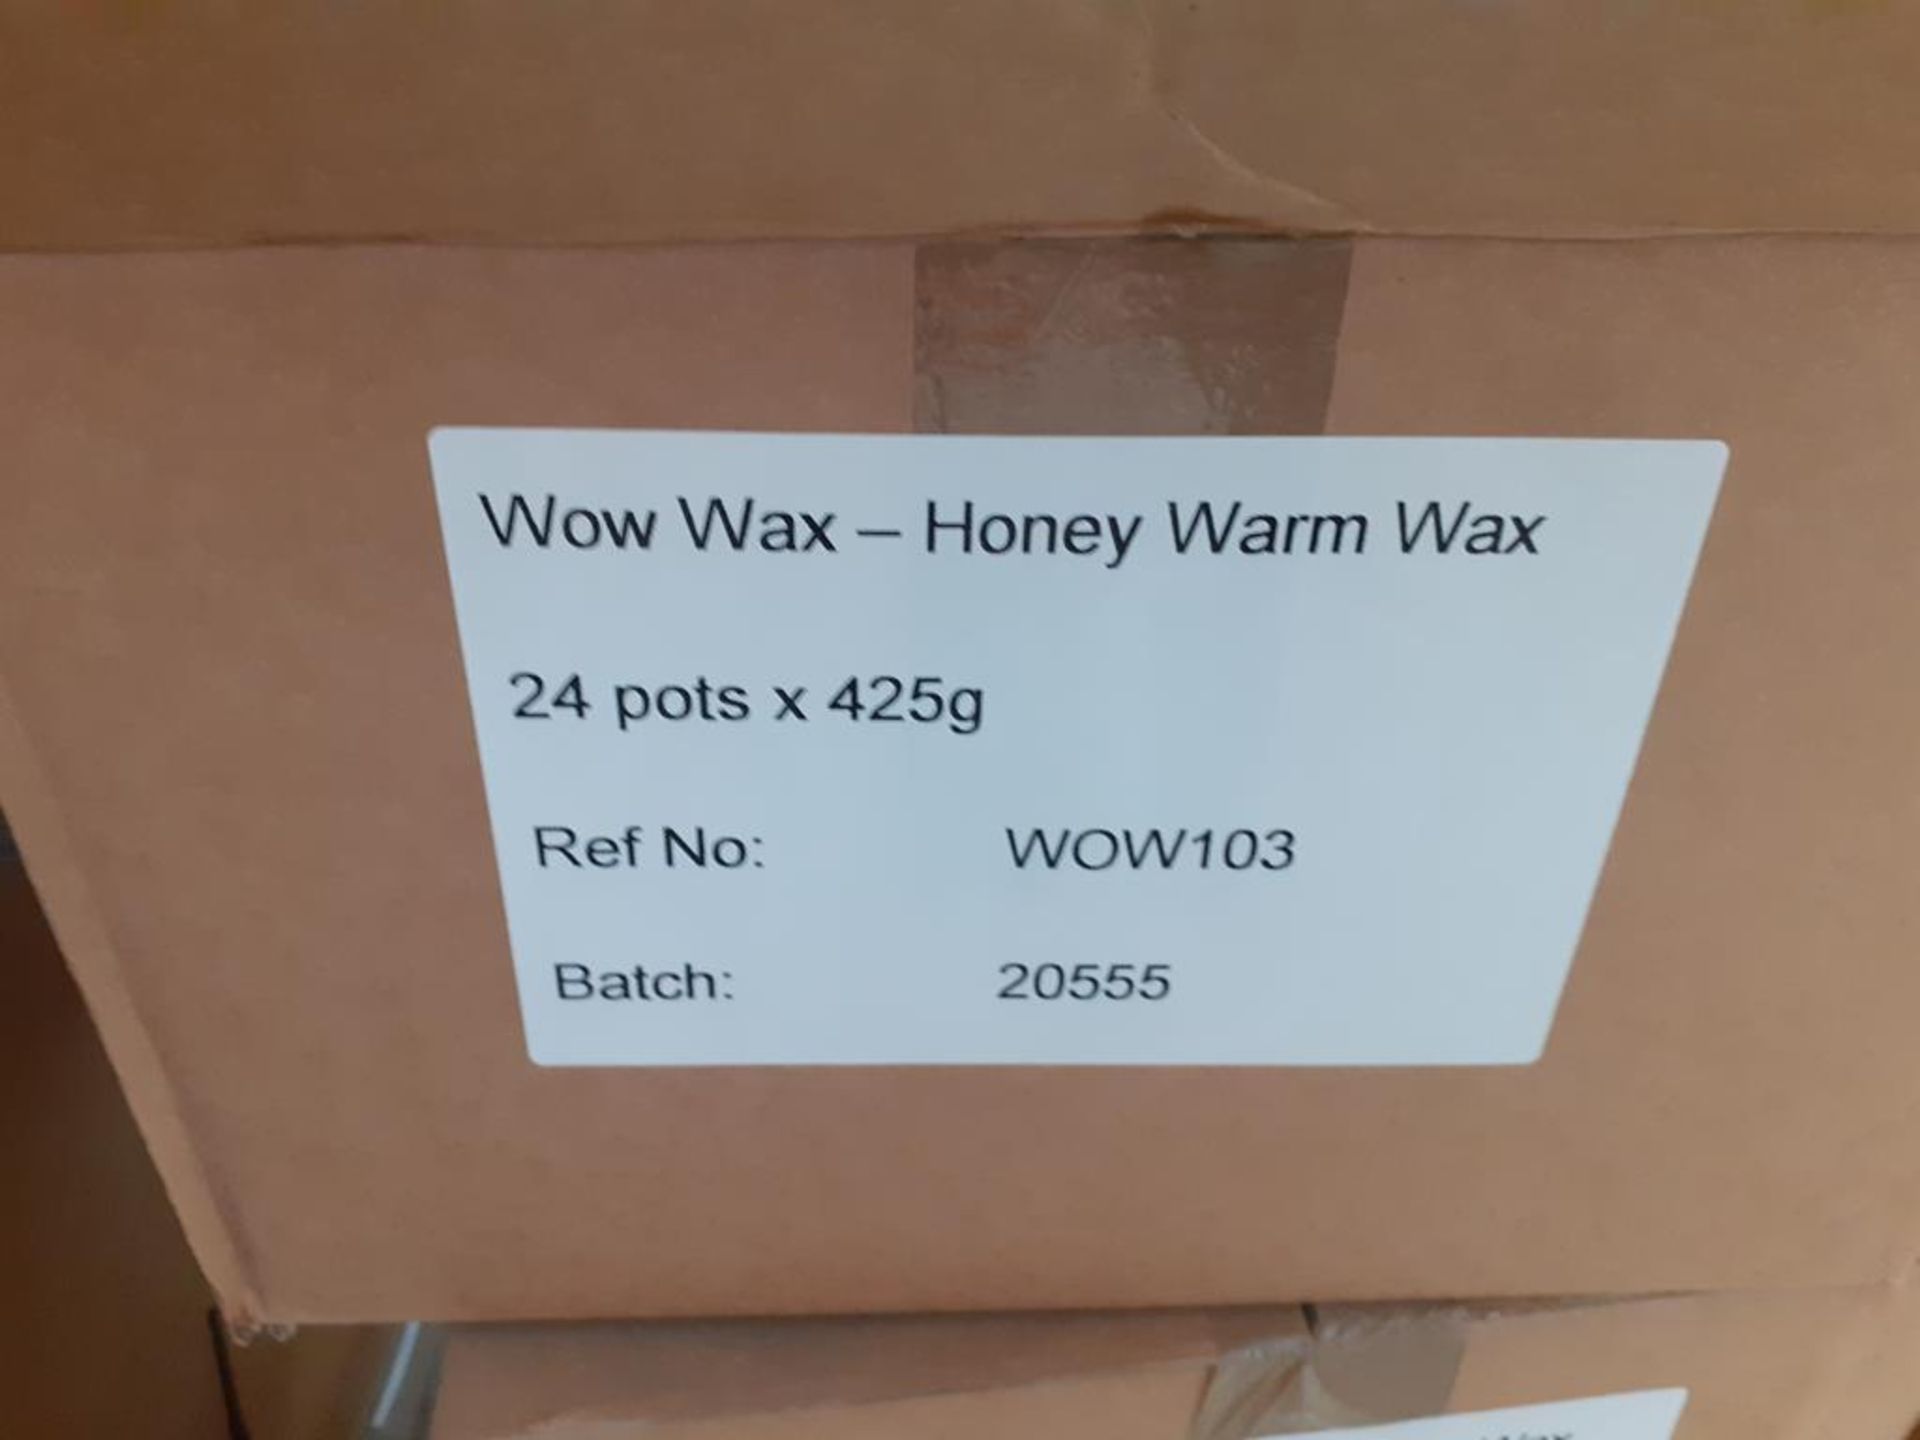 Approx 8 x boxes of Wow Wax Honey Warm Wax - Image 2 of 3